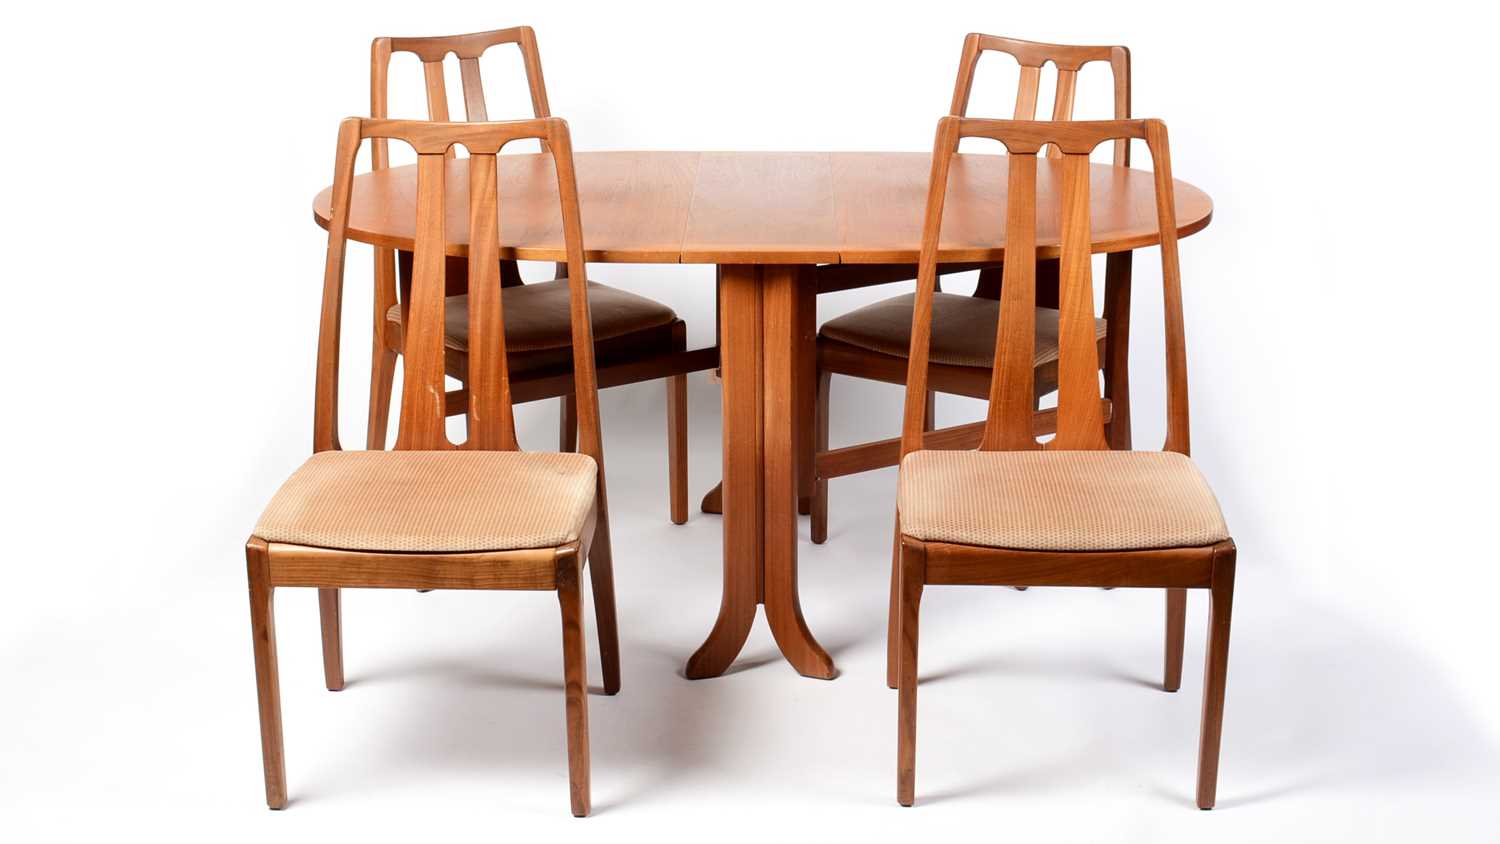 Nathan - British modern design, a retro vintage teak wood extendable dining table and chairs.